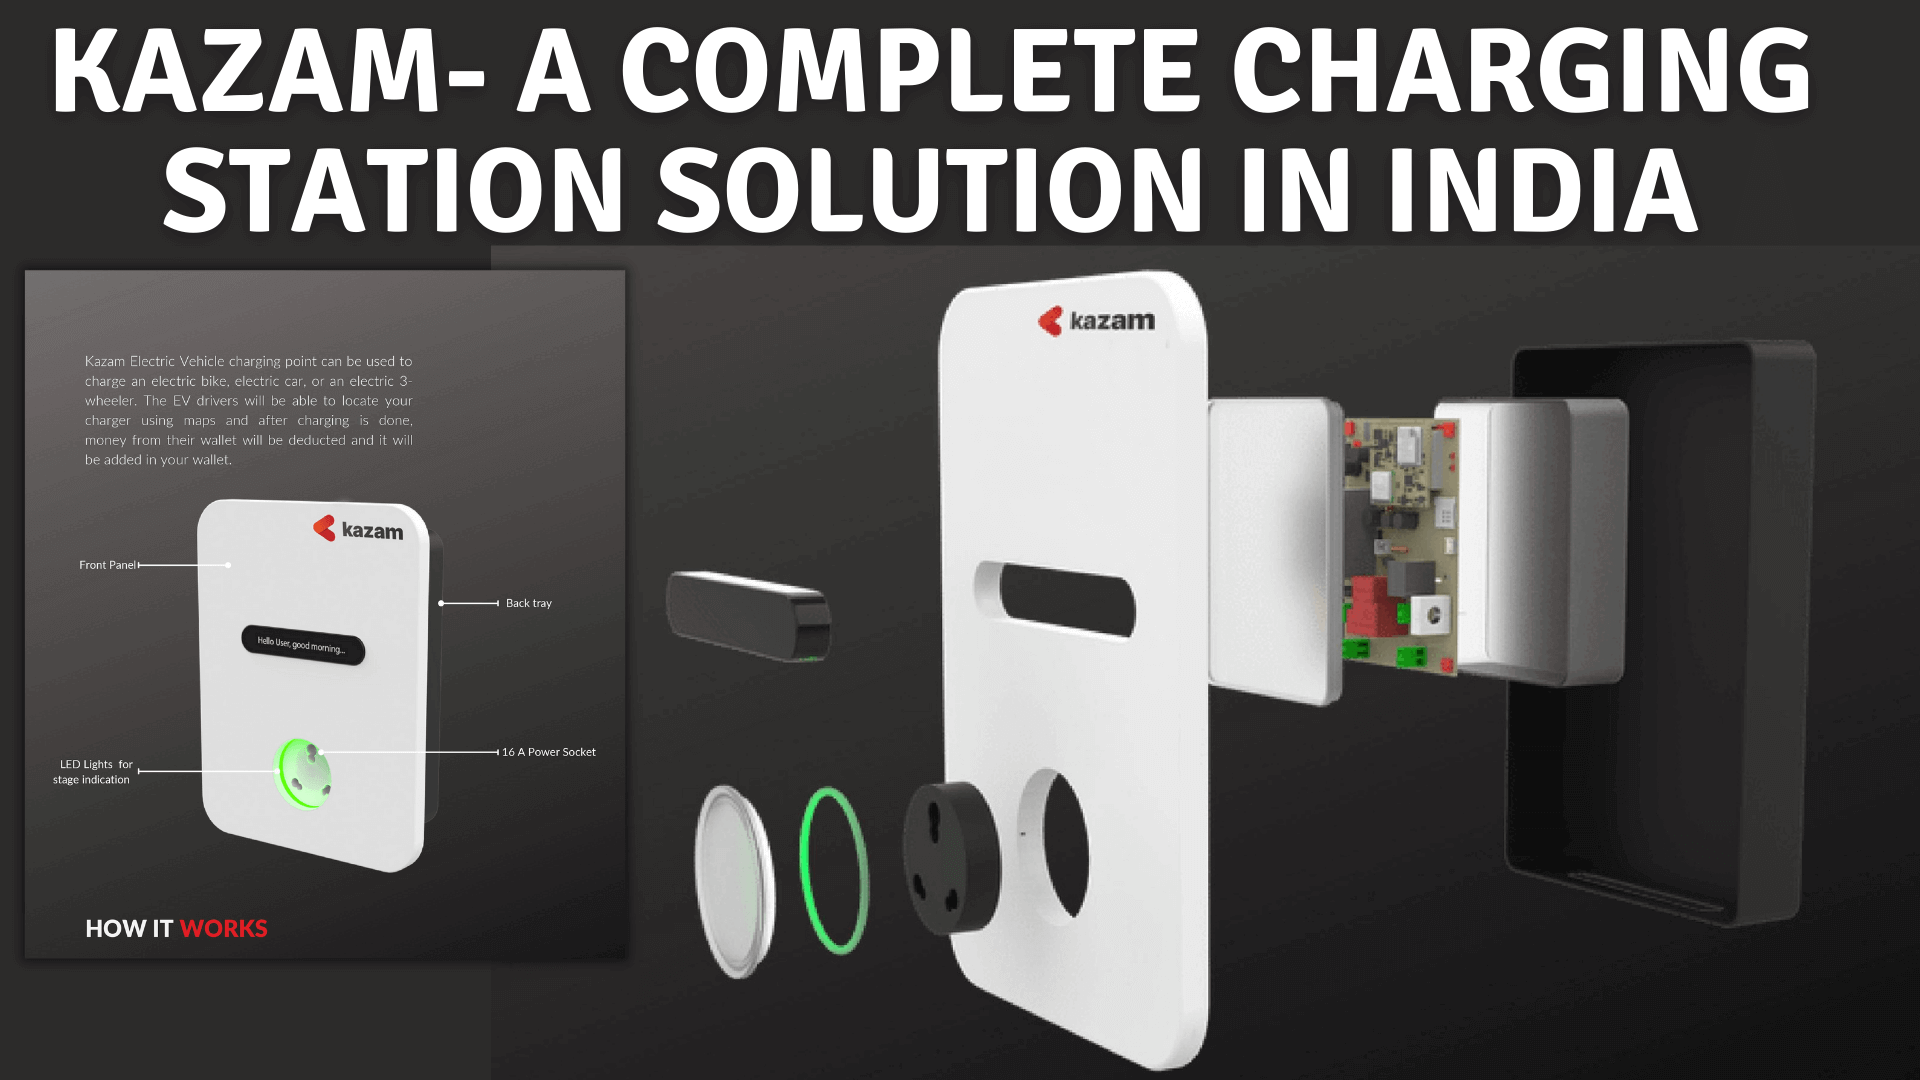 https://e-vehicleinfo.com/kazam-a-complete-charging-station-solution-in-india/